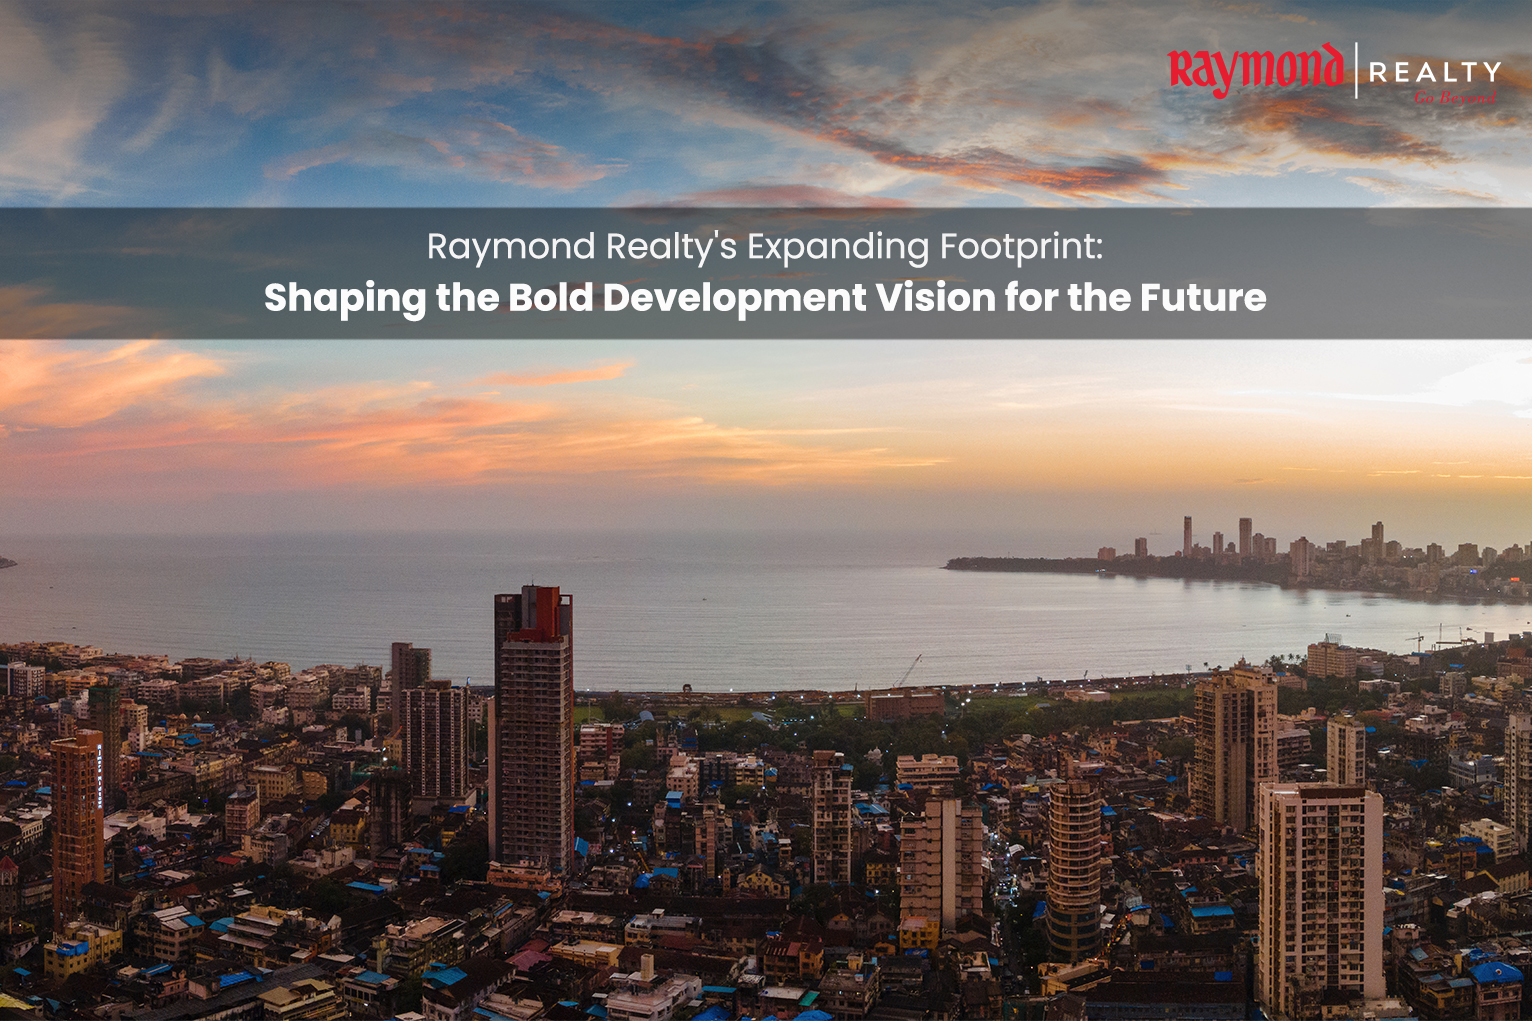 Raymond Realty’s Expanding Footprint: Shaping The Bold Development Vision For The Future